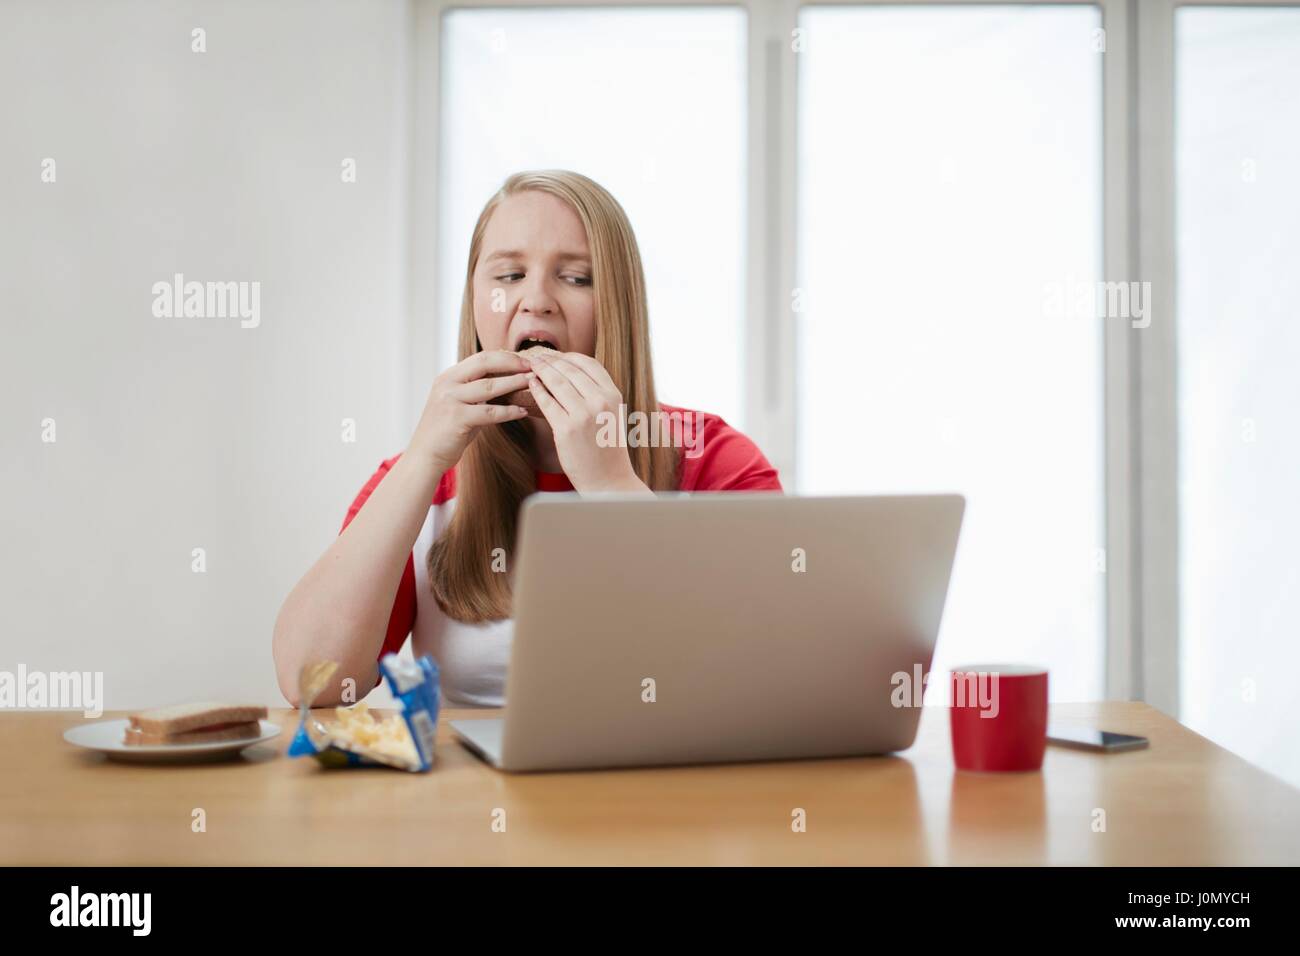 Young woman with laptop eating sandwich. Banque D'Images